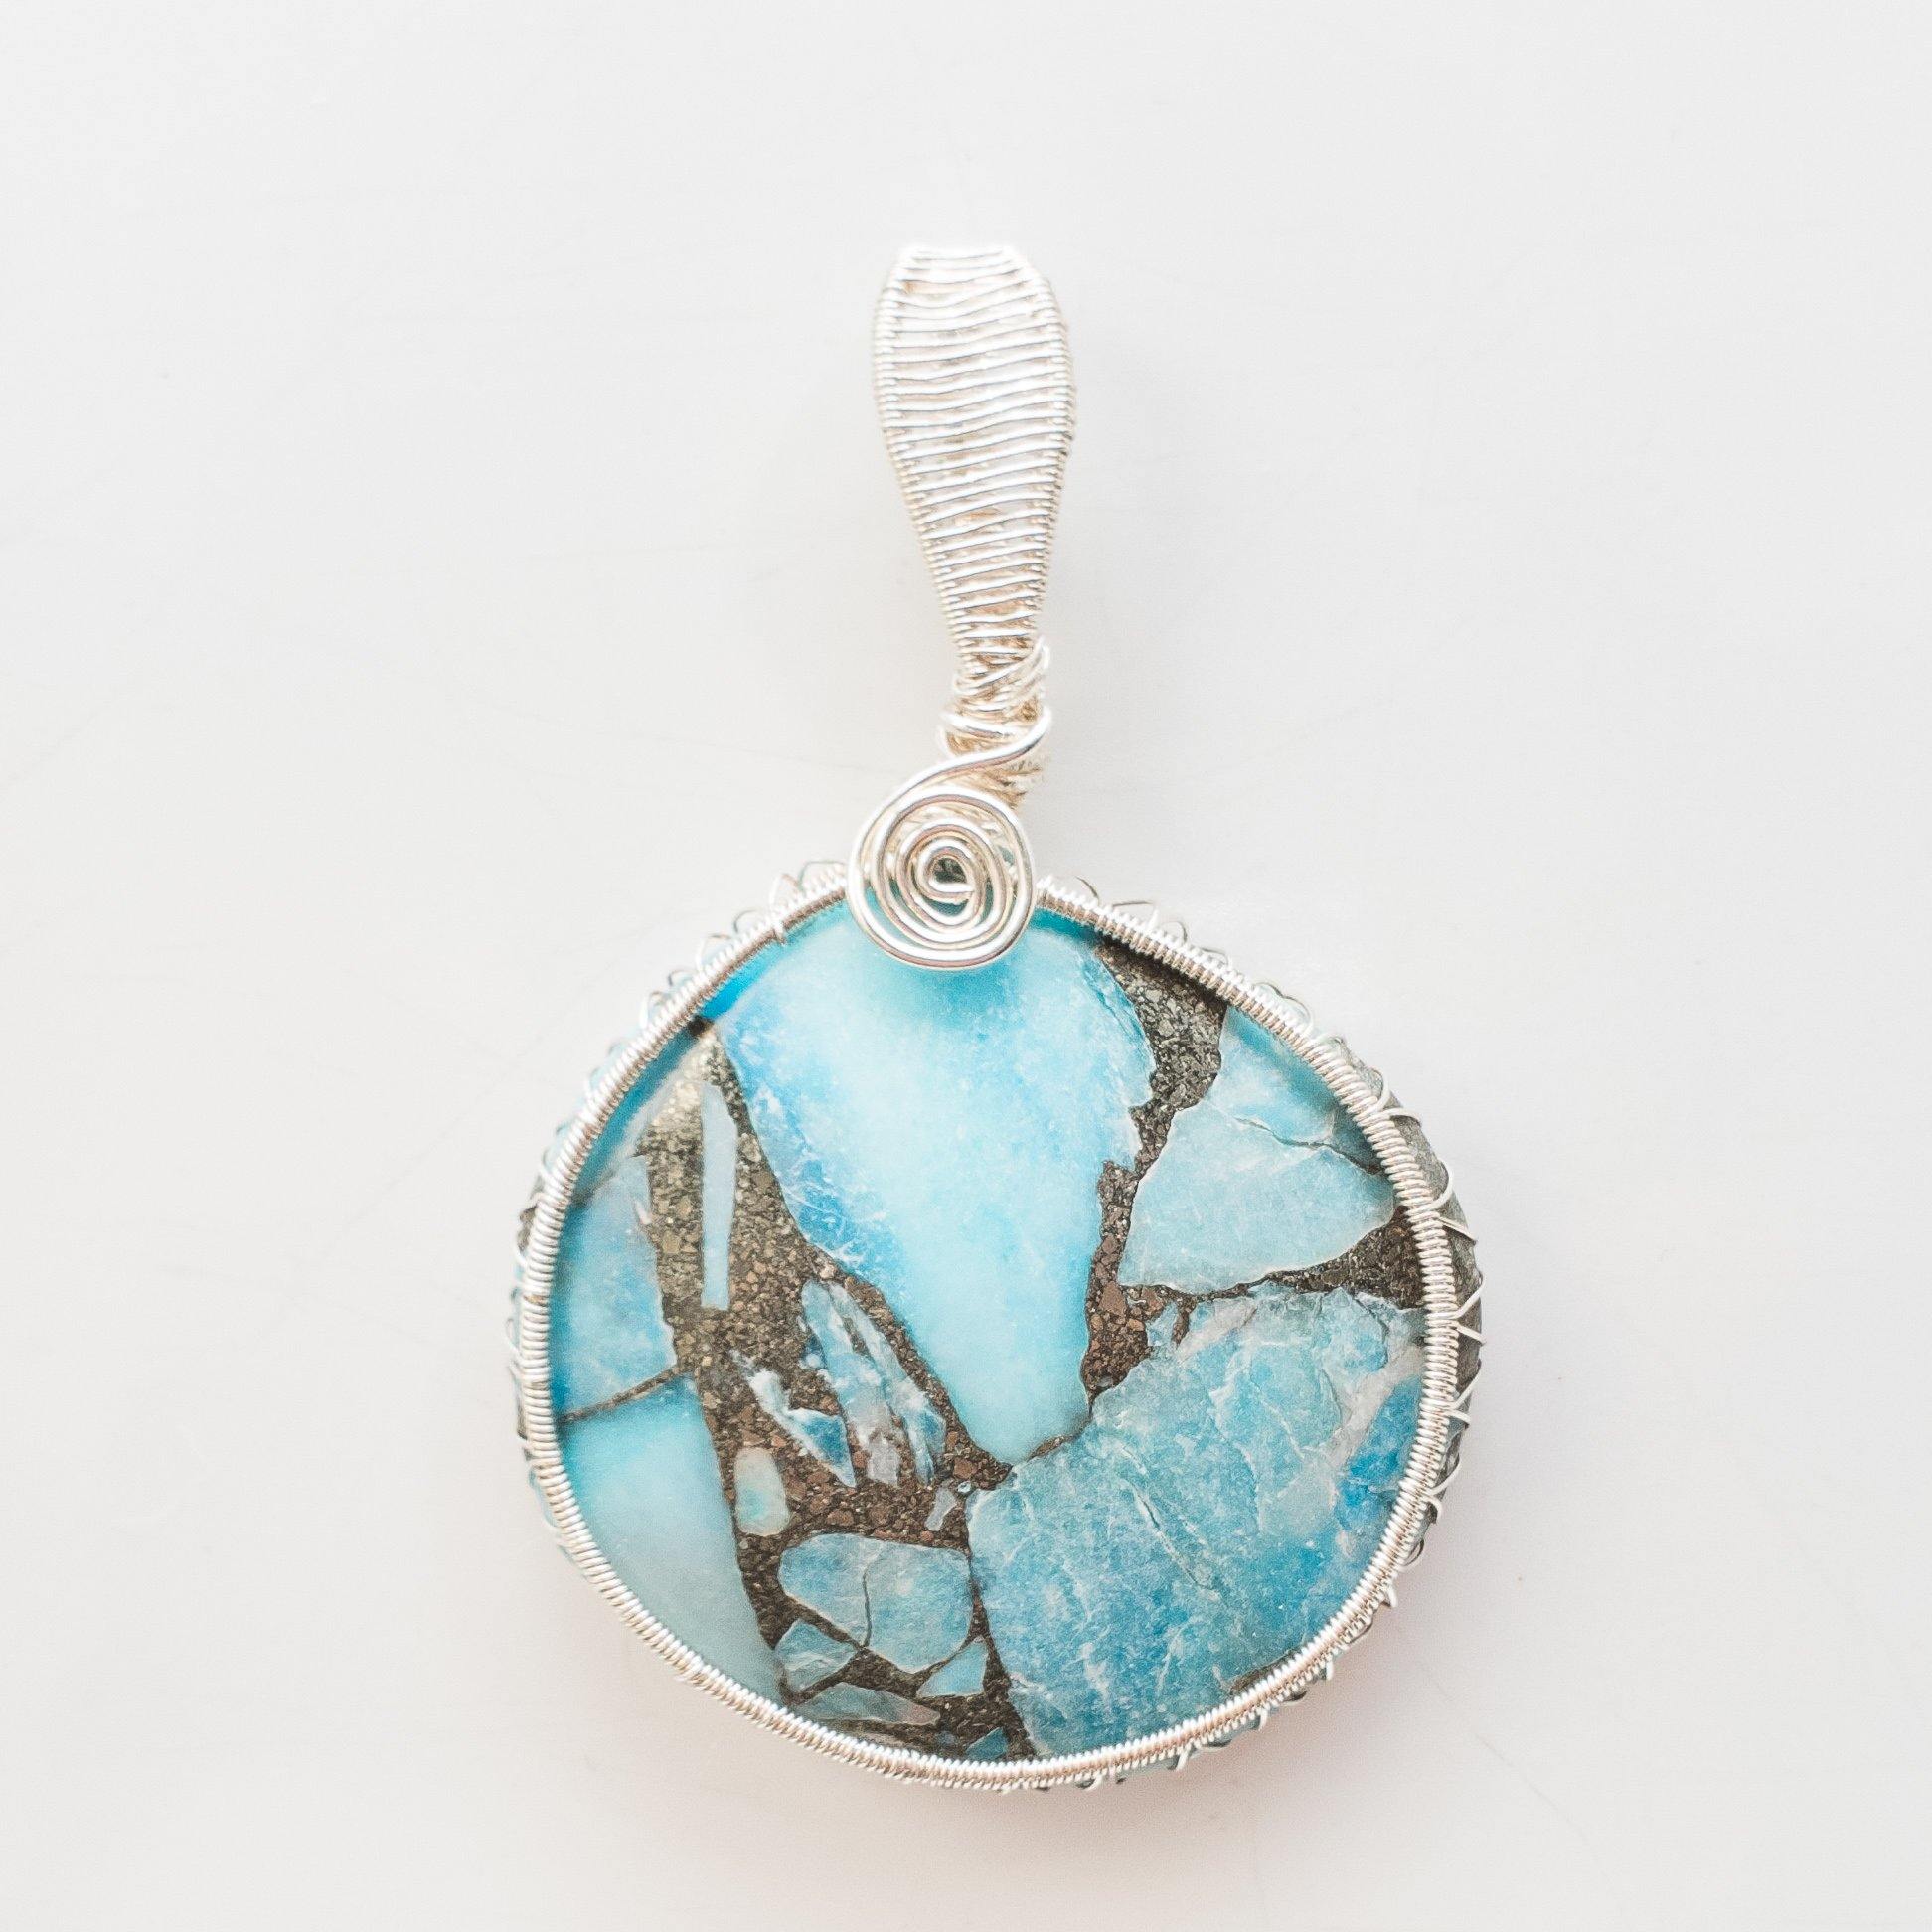 Laguna Collection~ Chunky Turquoise Pendant in Sterling Silver front view - BellaChel Jeweler